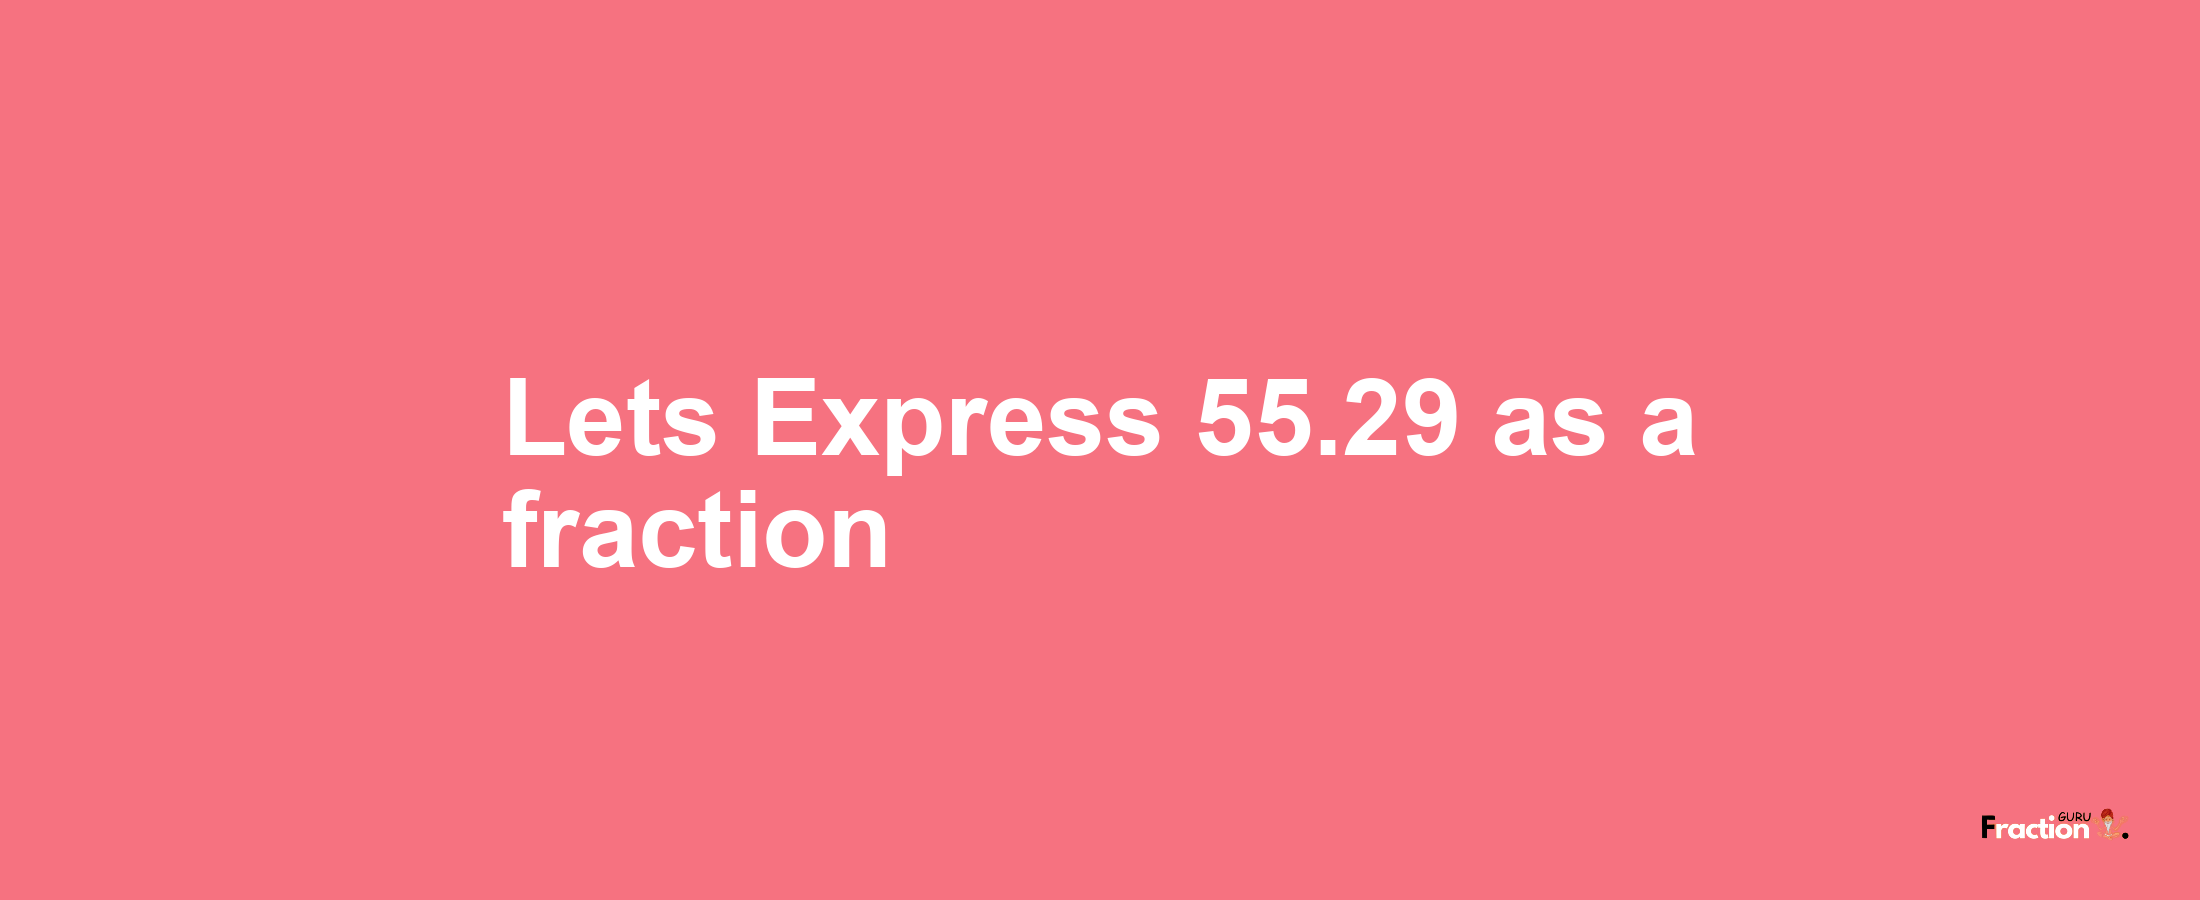 Lets Express 55.29 as afraction